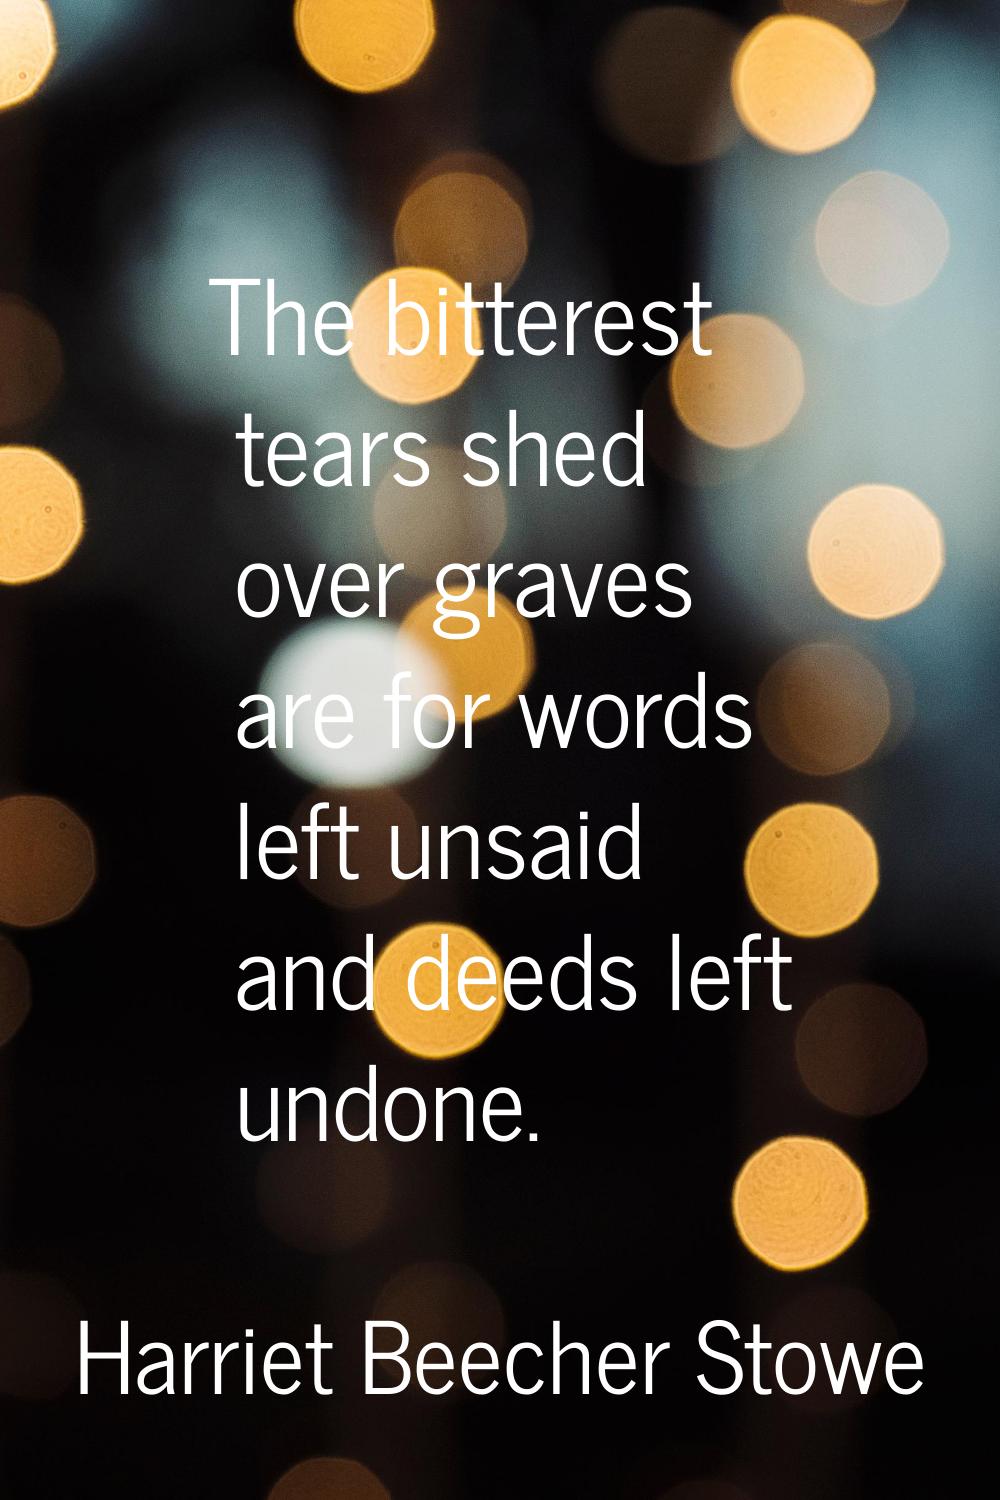 The bitterest tears shed over graves are for words left unsaid and deeds left undone.